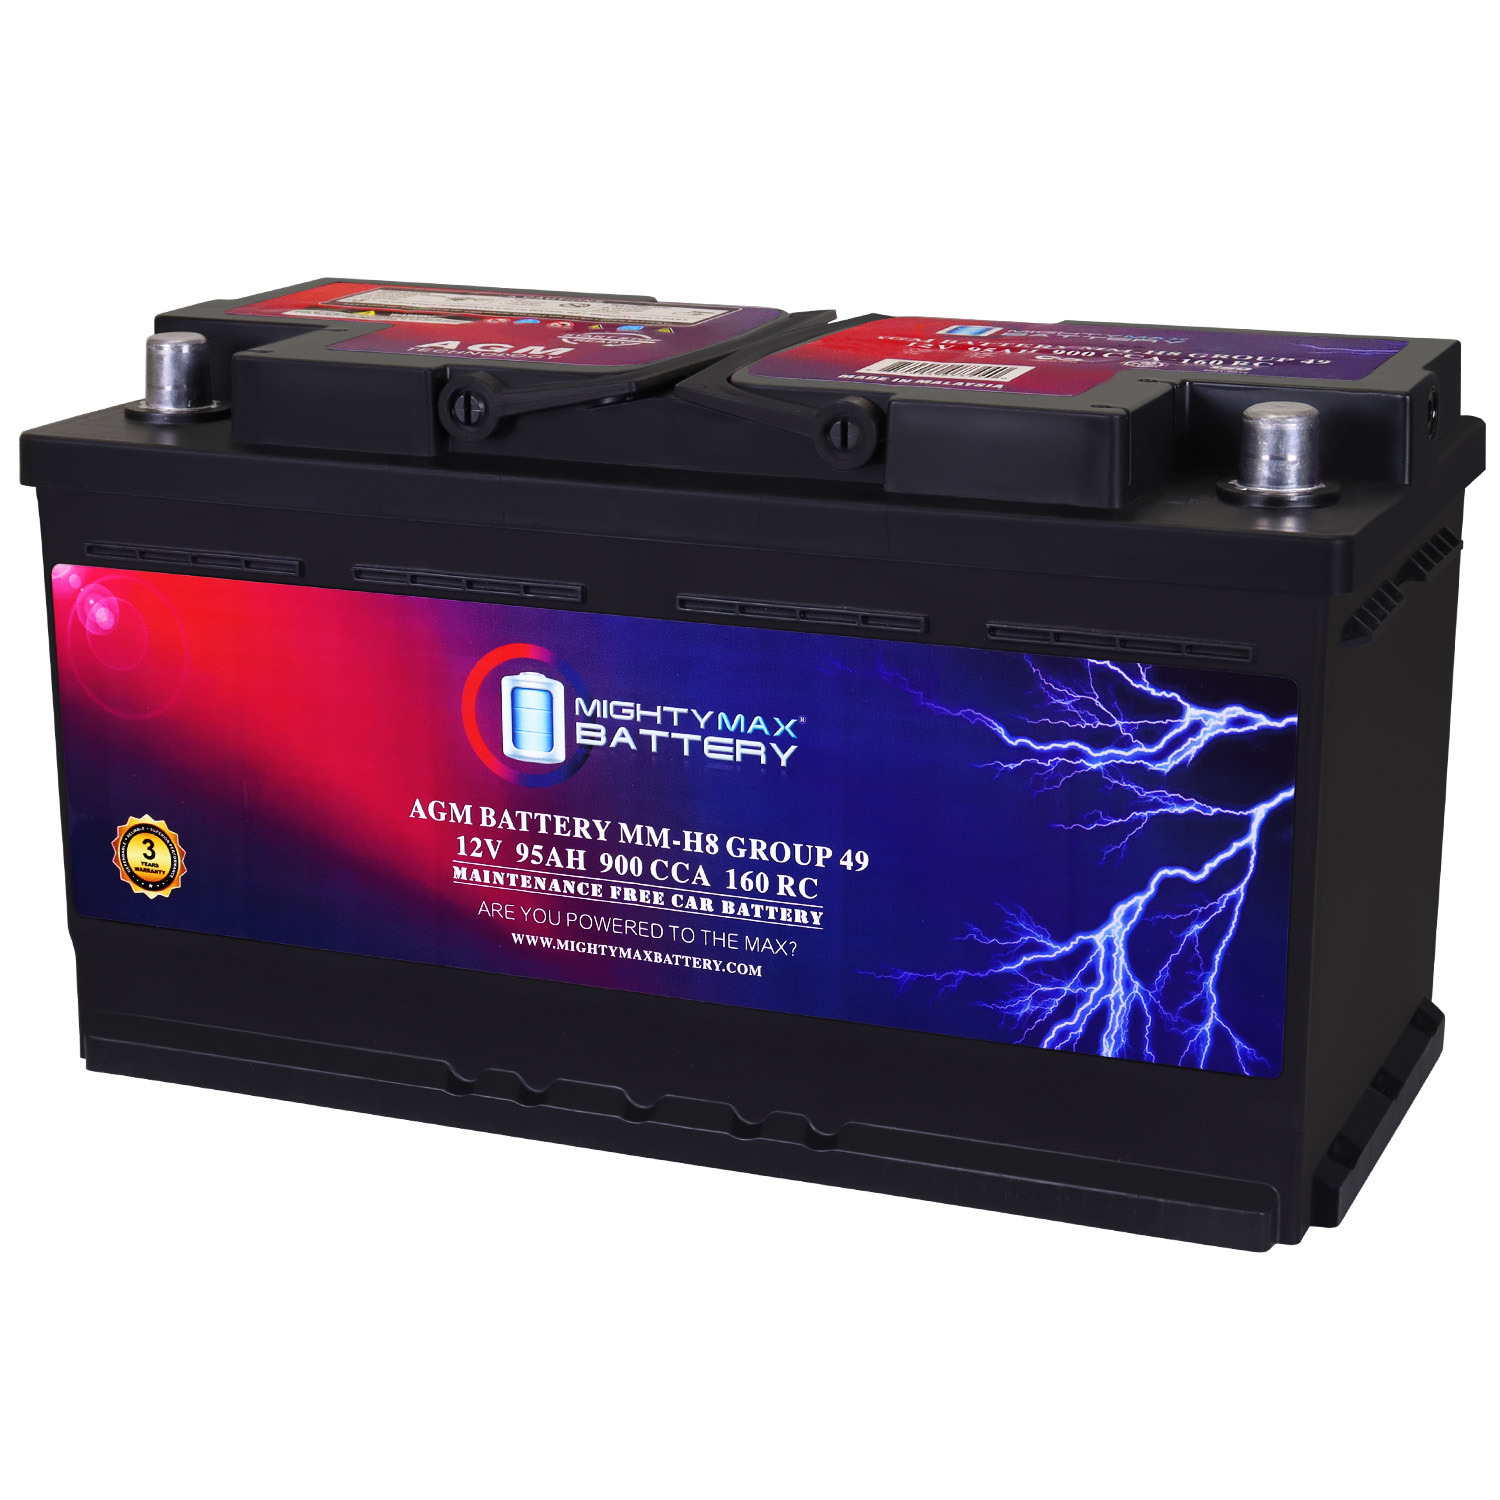 MM-H8 Group 49 12V 95Ah 160RC 900CCA Replacement Battery Compatible with Aston Martin Rapide 10-19